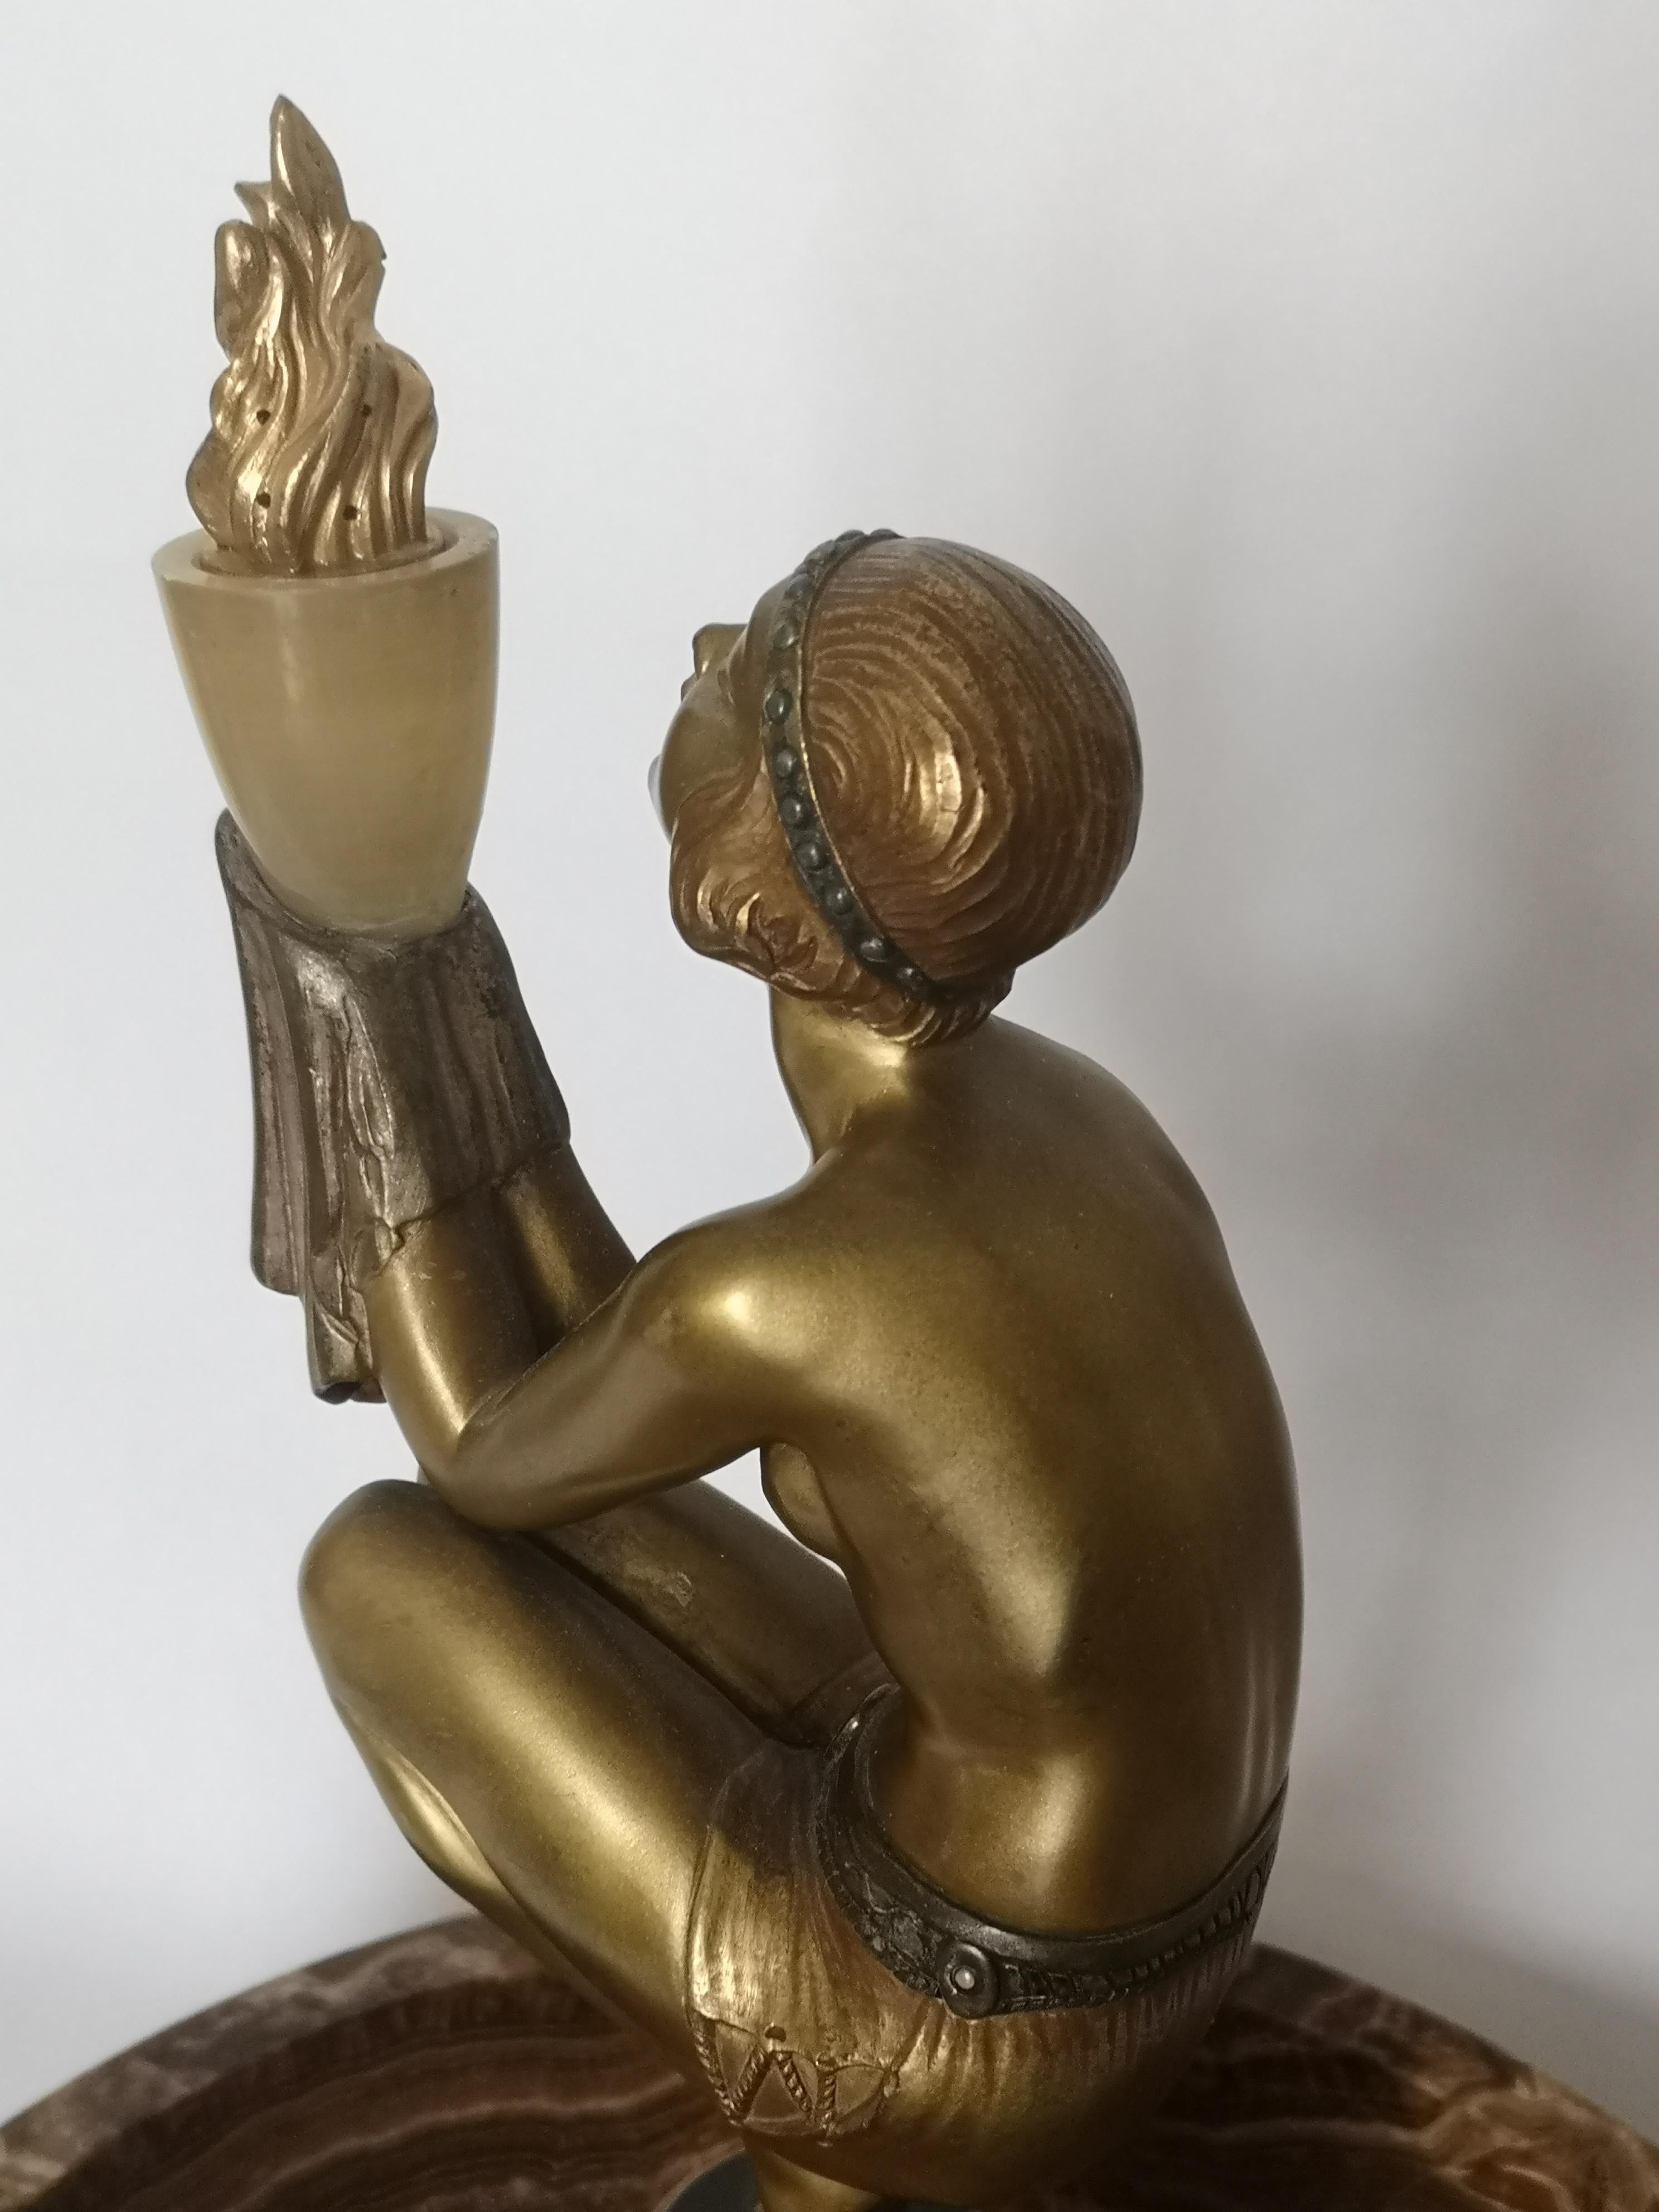 Early 20th Century French Art Deco Bronze and Onyx Lamp Sculpture by Duvernet For Sale 5